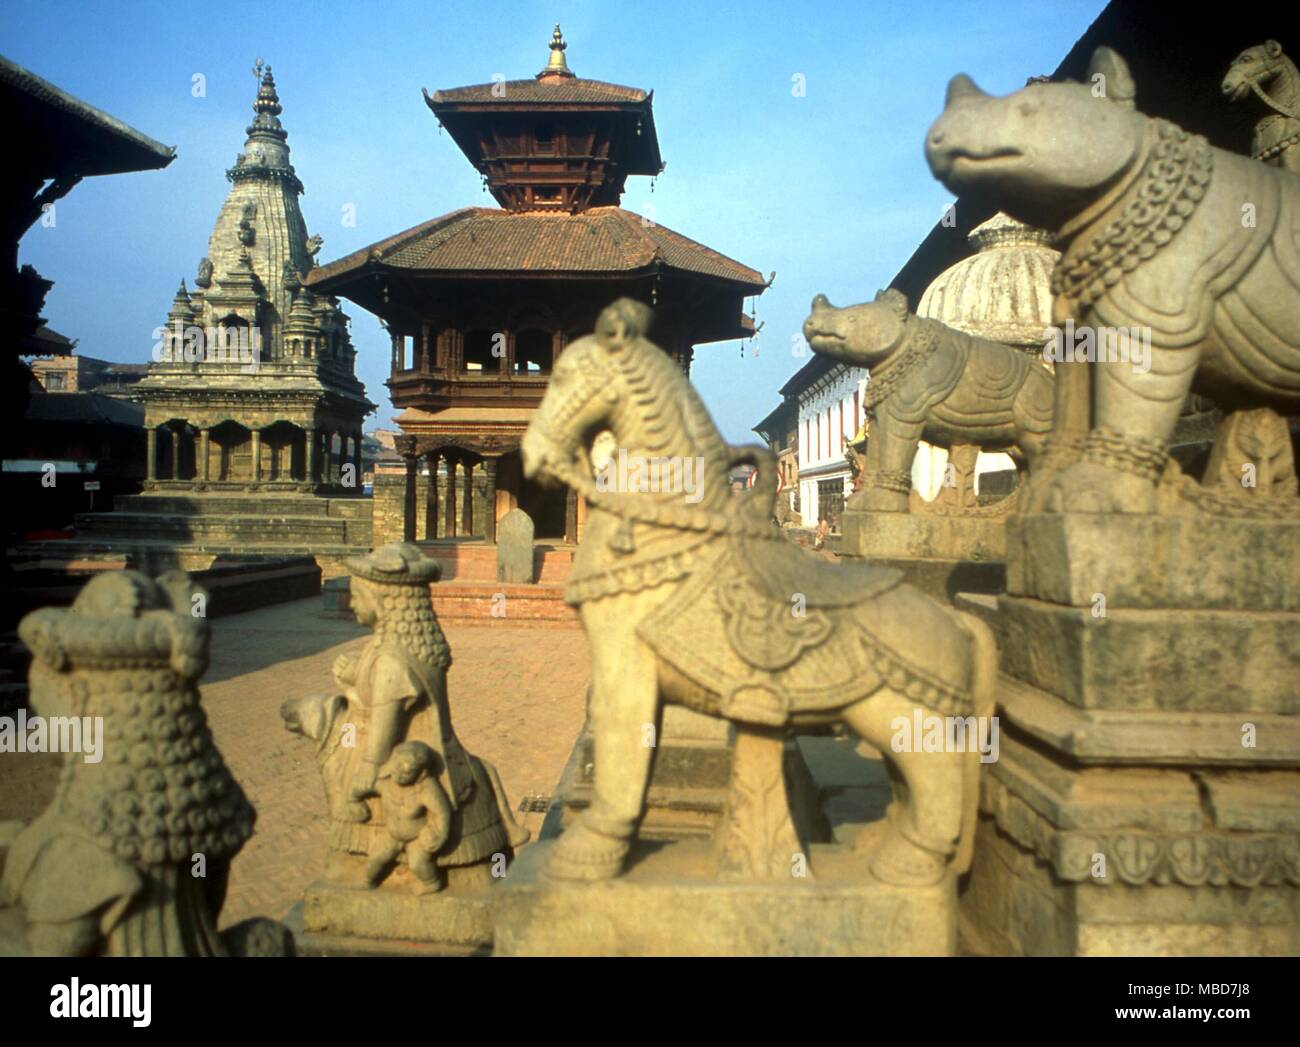 NEPAL - Bhaktapur 'The City of Devotees', Bhaktapur, in Nepal, viewed from the ornate staircase of the Nyatapola Temple Stock Photo